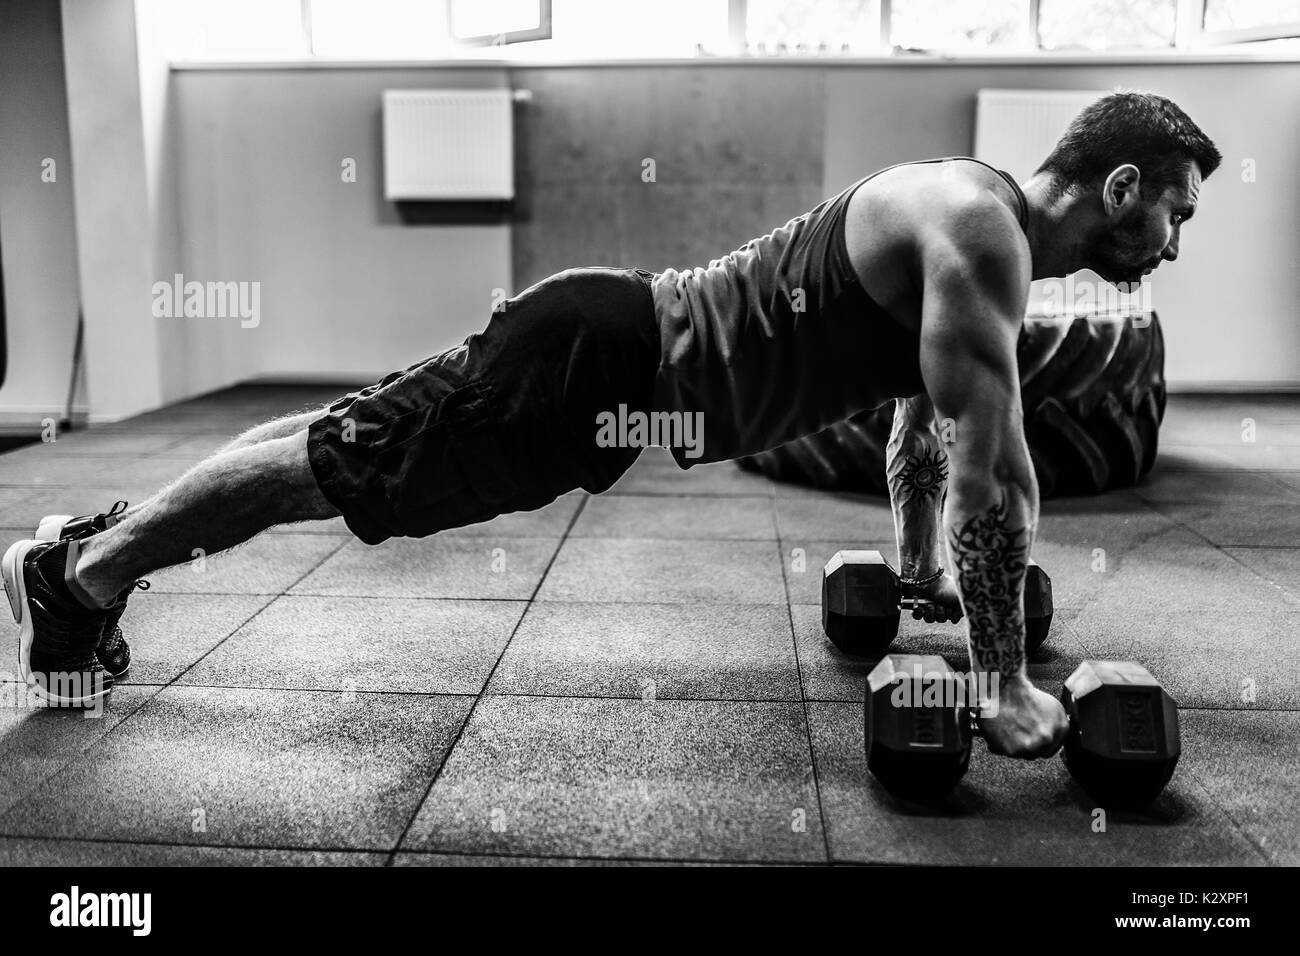 Muscular man doing pushup exercise with dumbbell Stock Photo